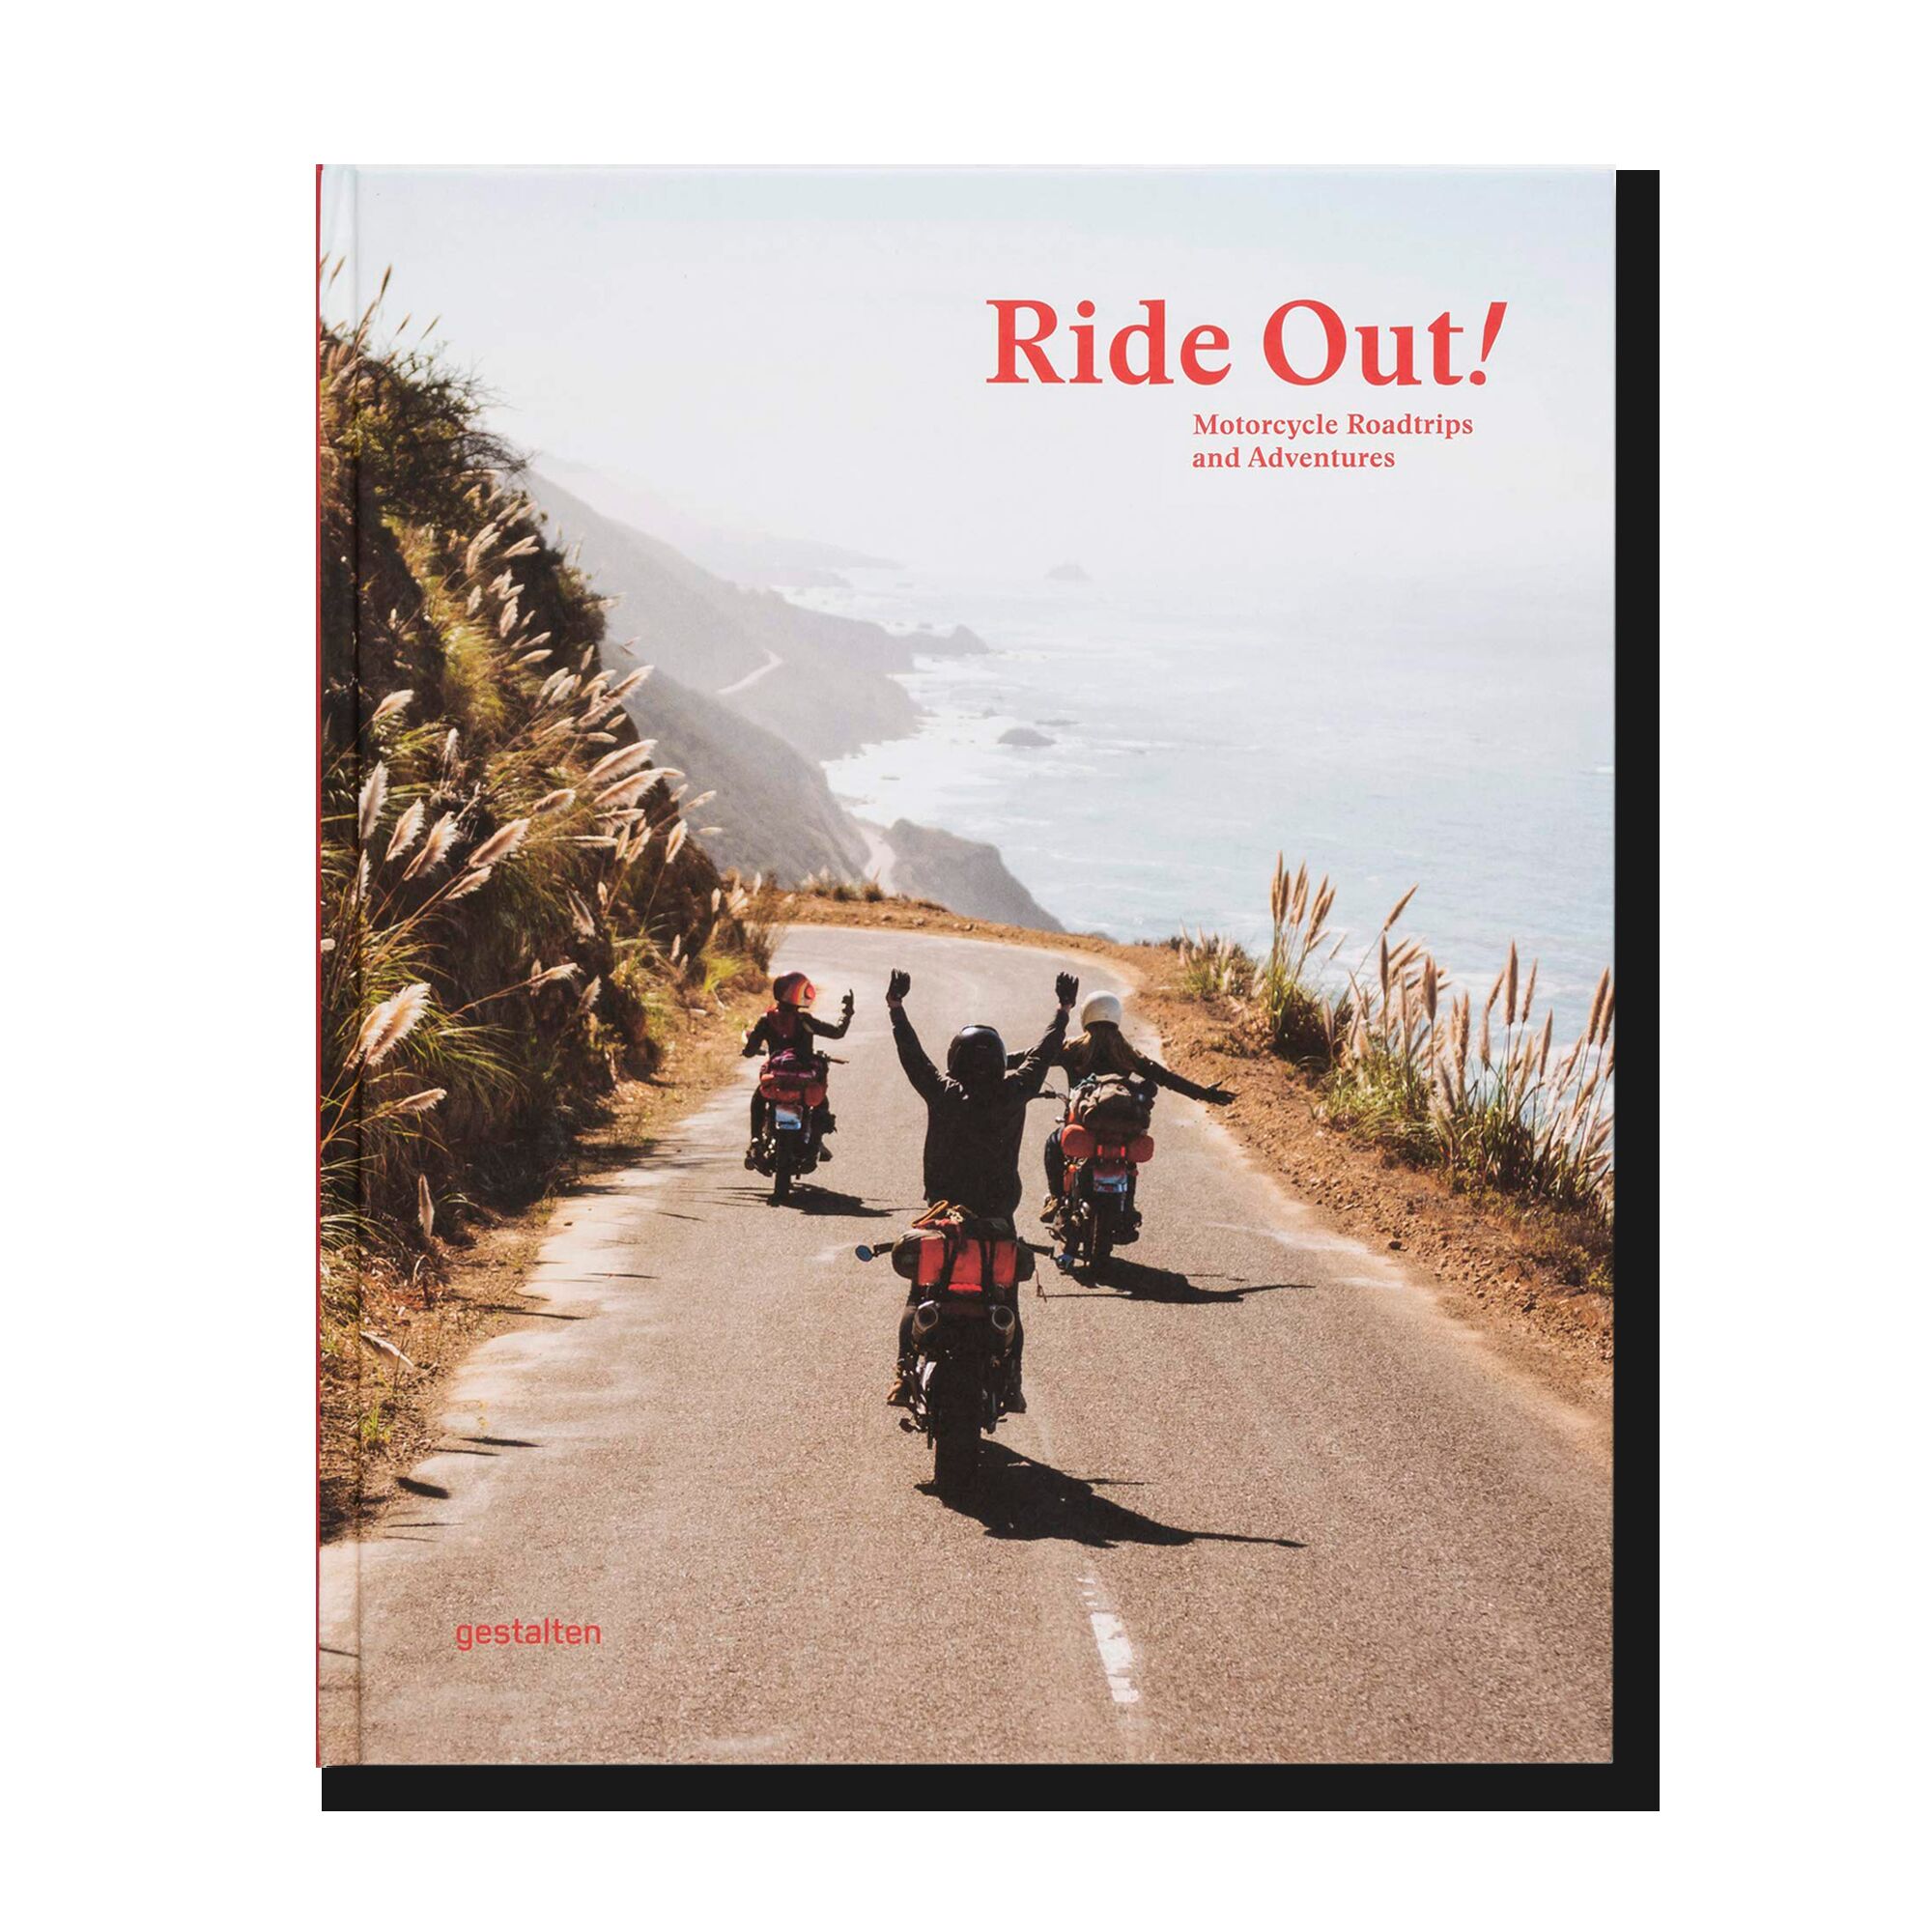 Ride Out!: Motorcycle Roadtrips and Adventures